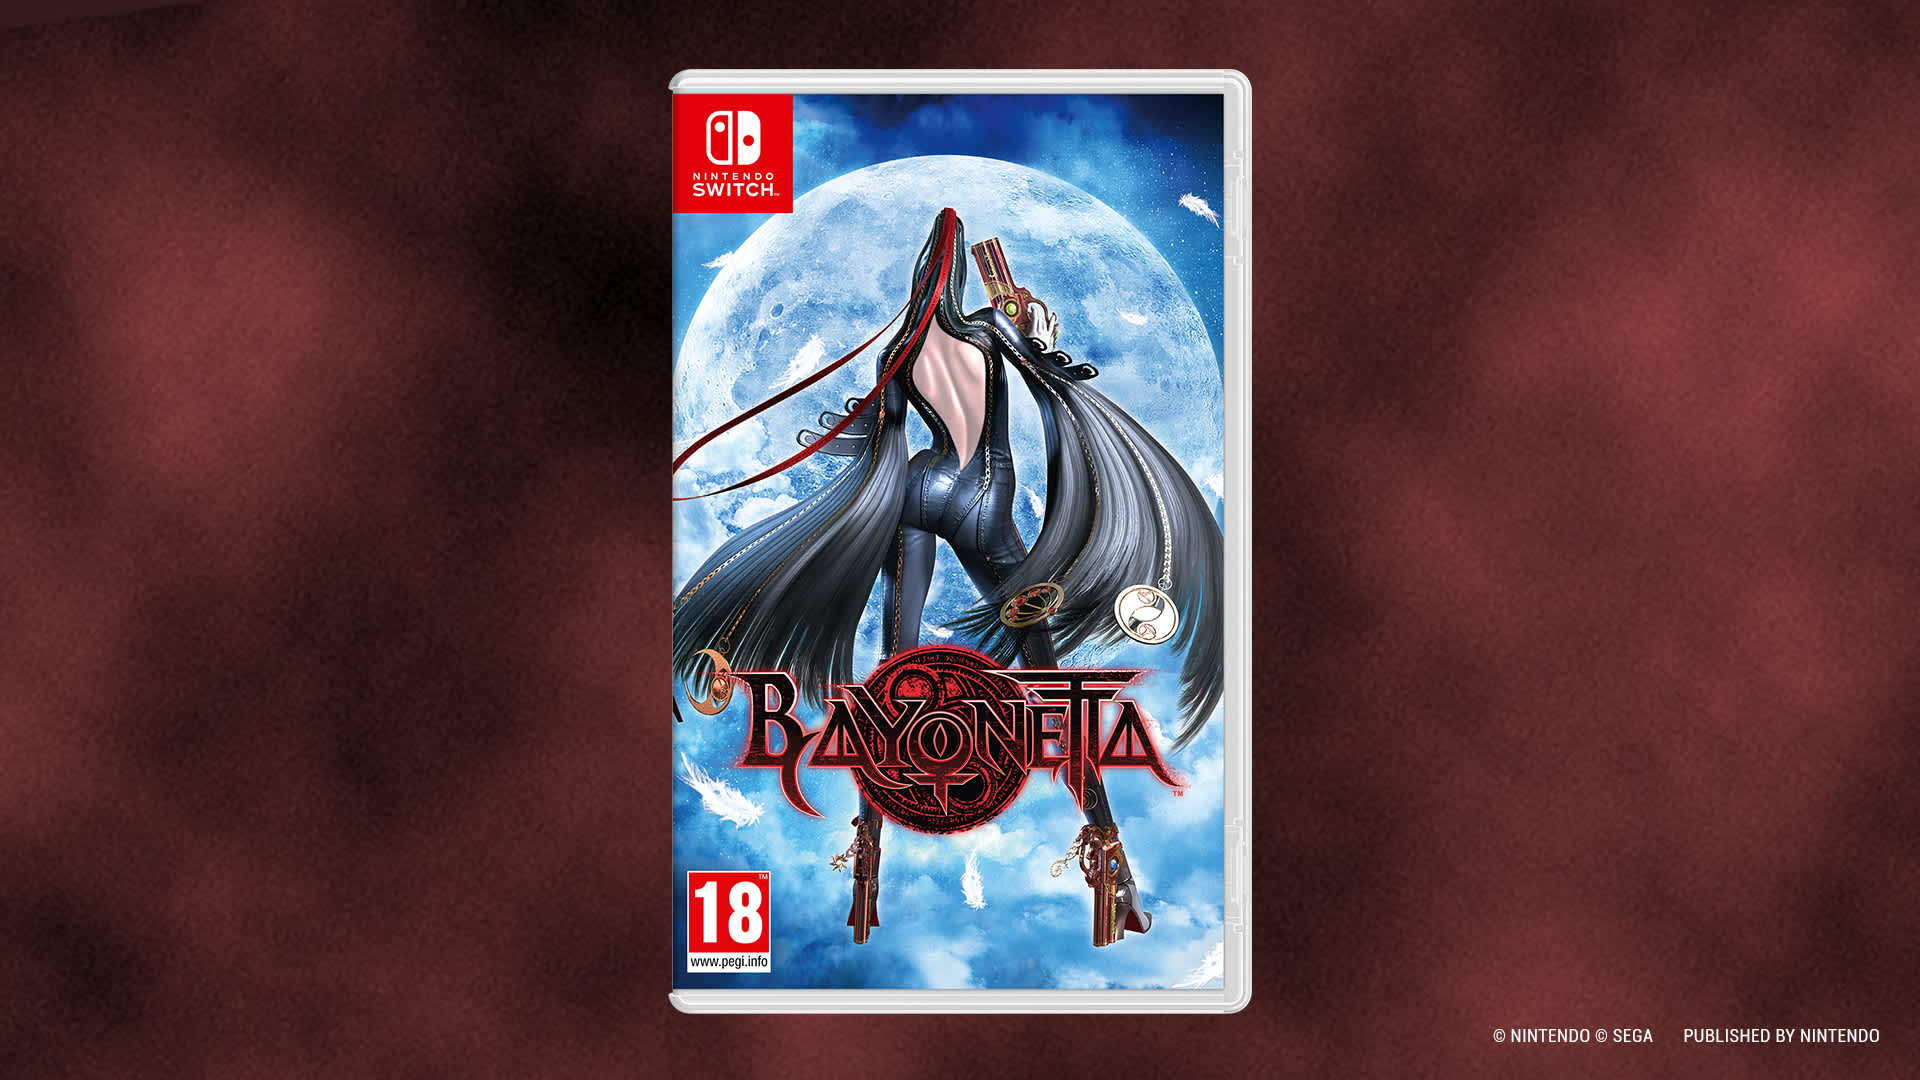 Thank you for registering your interest in Bayonetta.